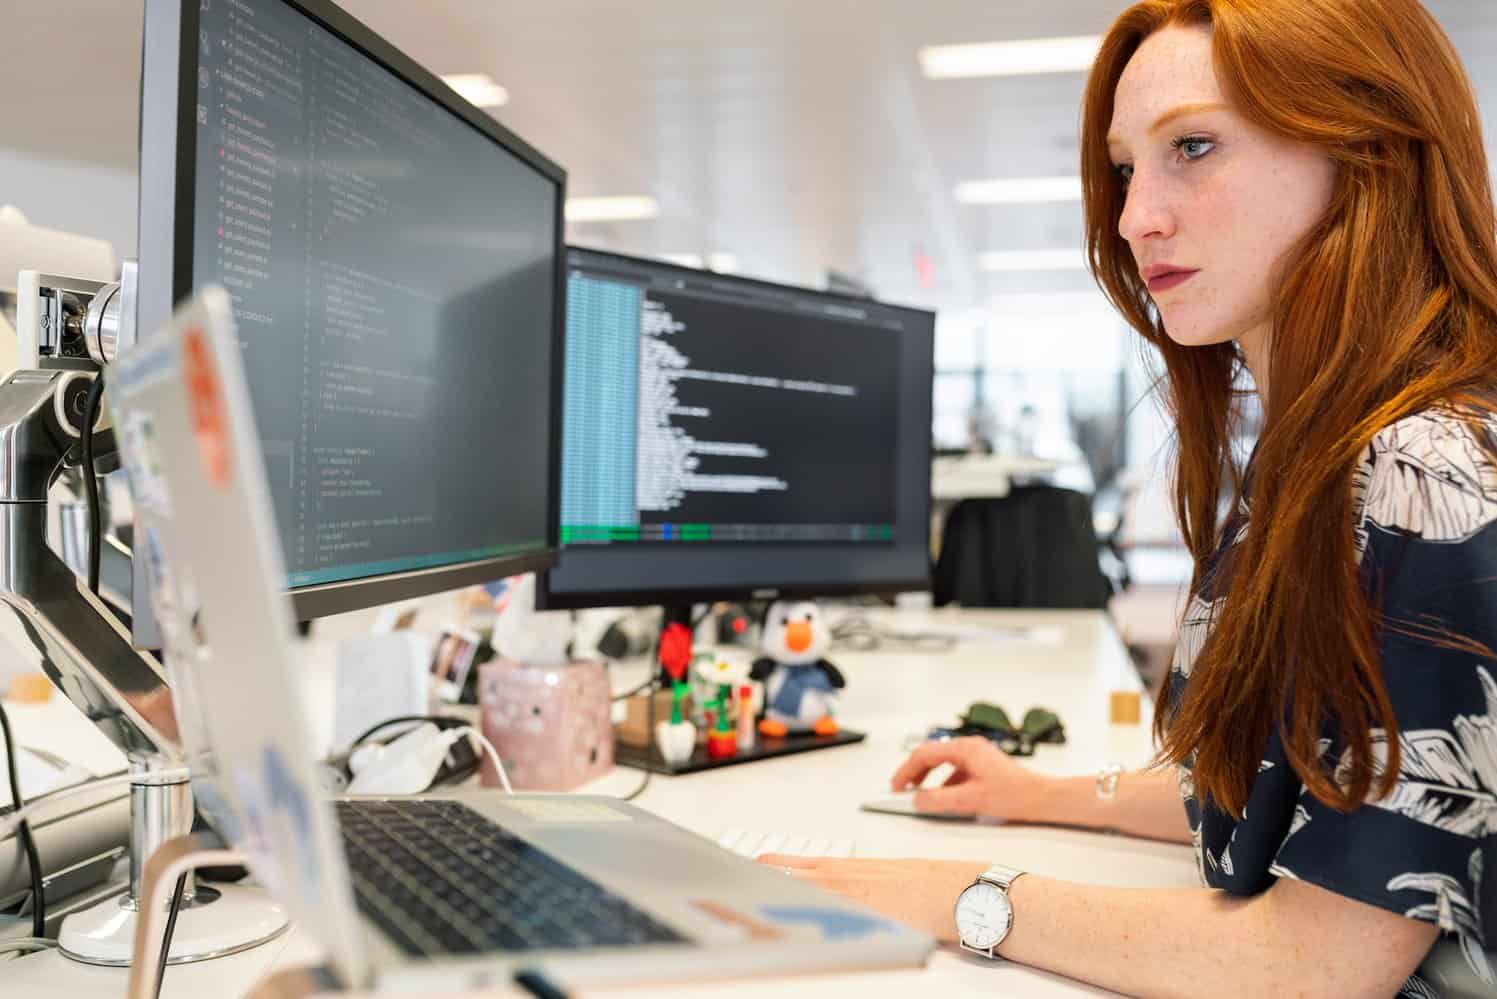 Where to Study to Get A Job in Tech in Europe